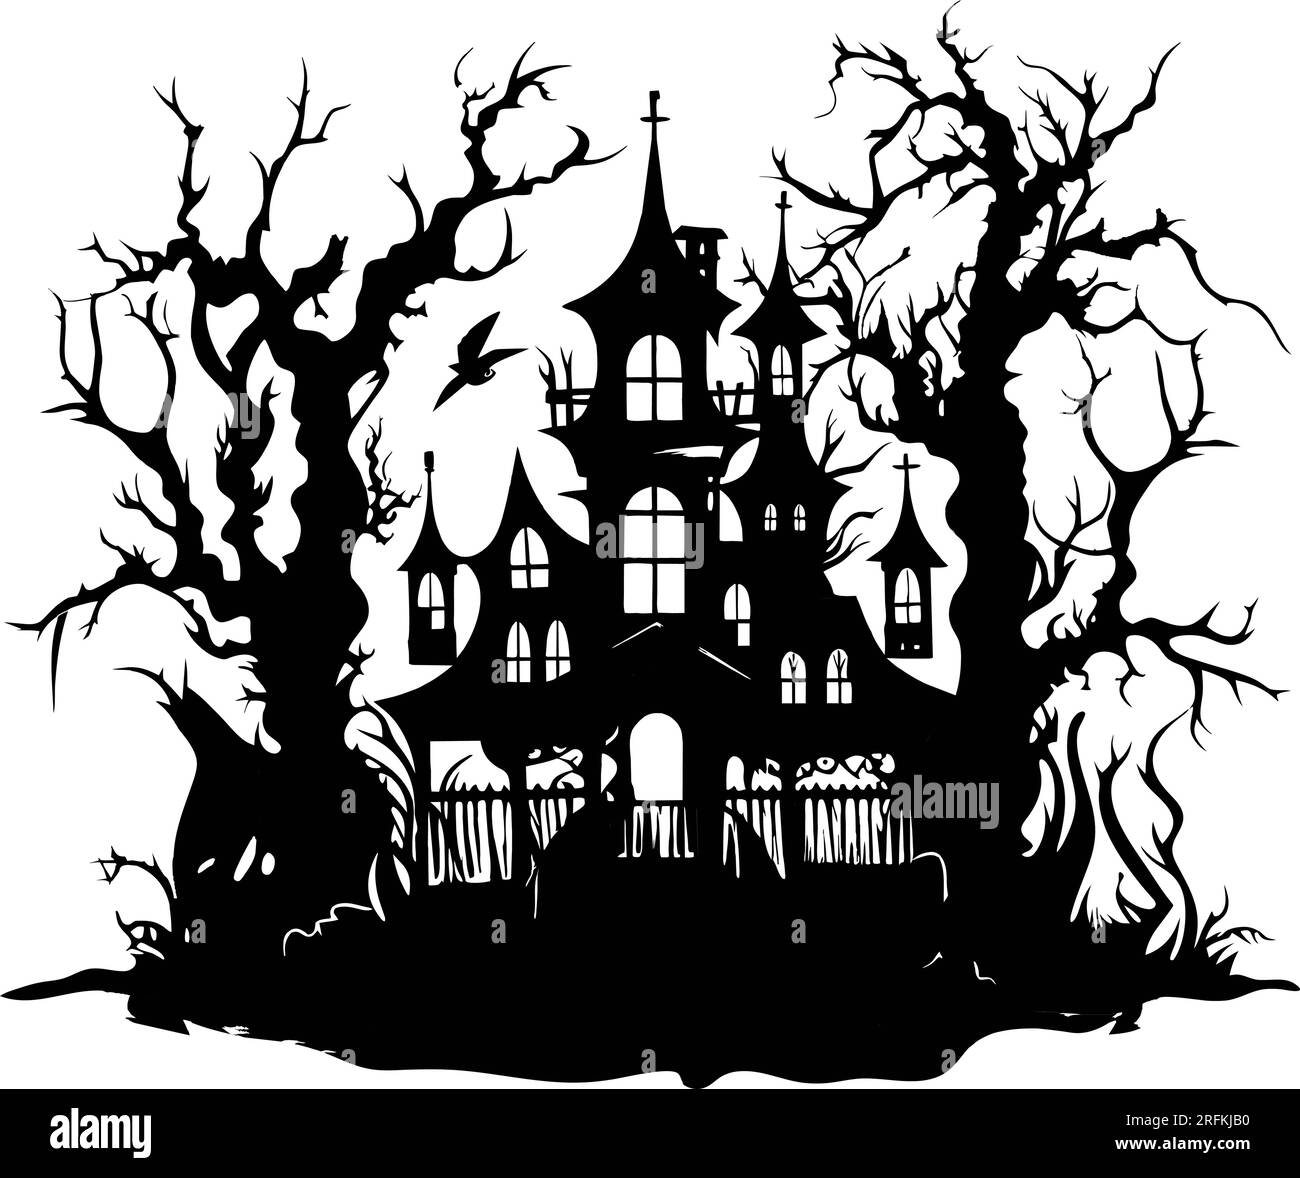 vector halloween castle landscape. black castle sillhouette. castle sillhouette with birds and trees vector illustration on white background. Stock Vector